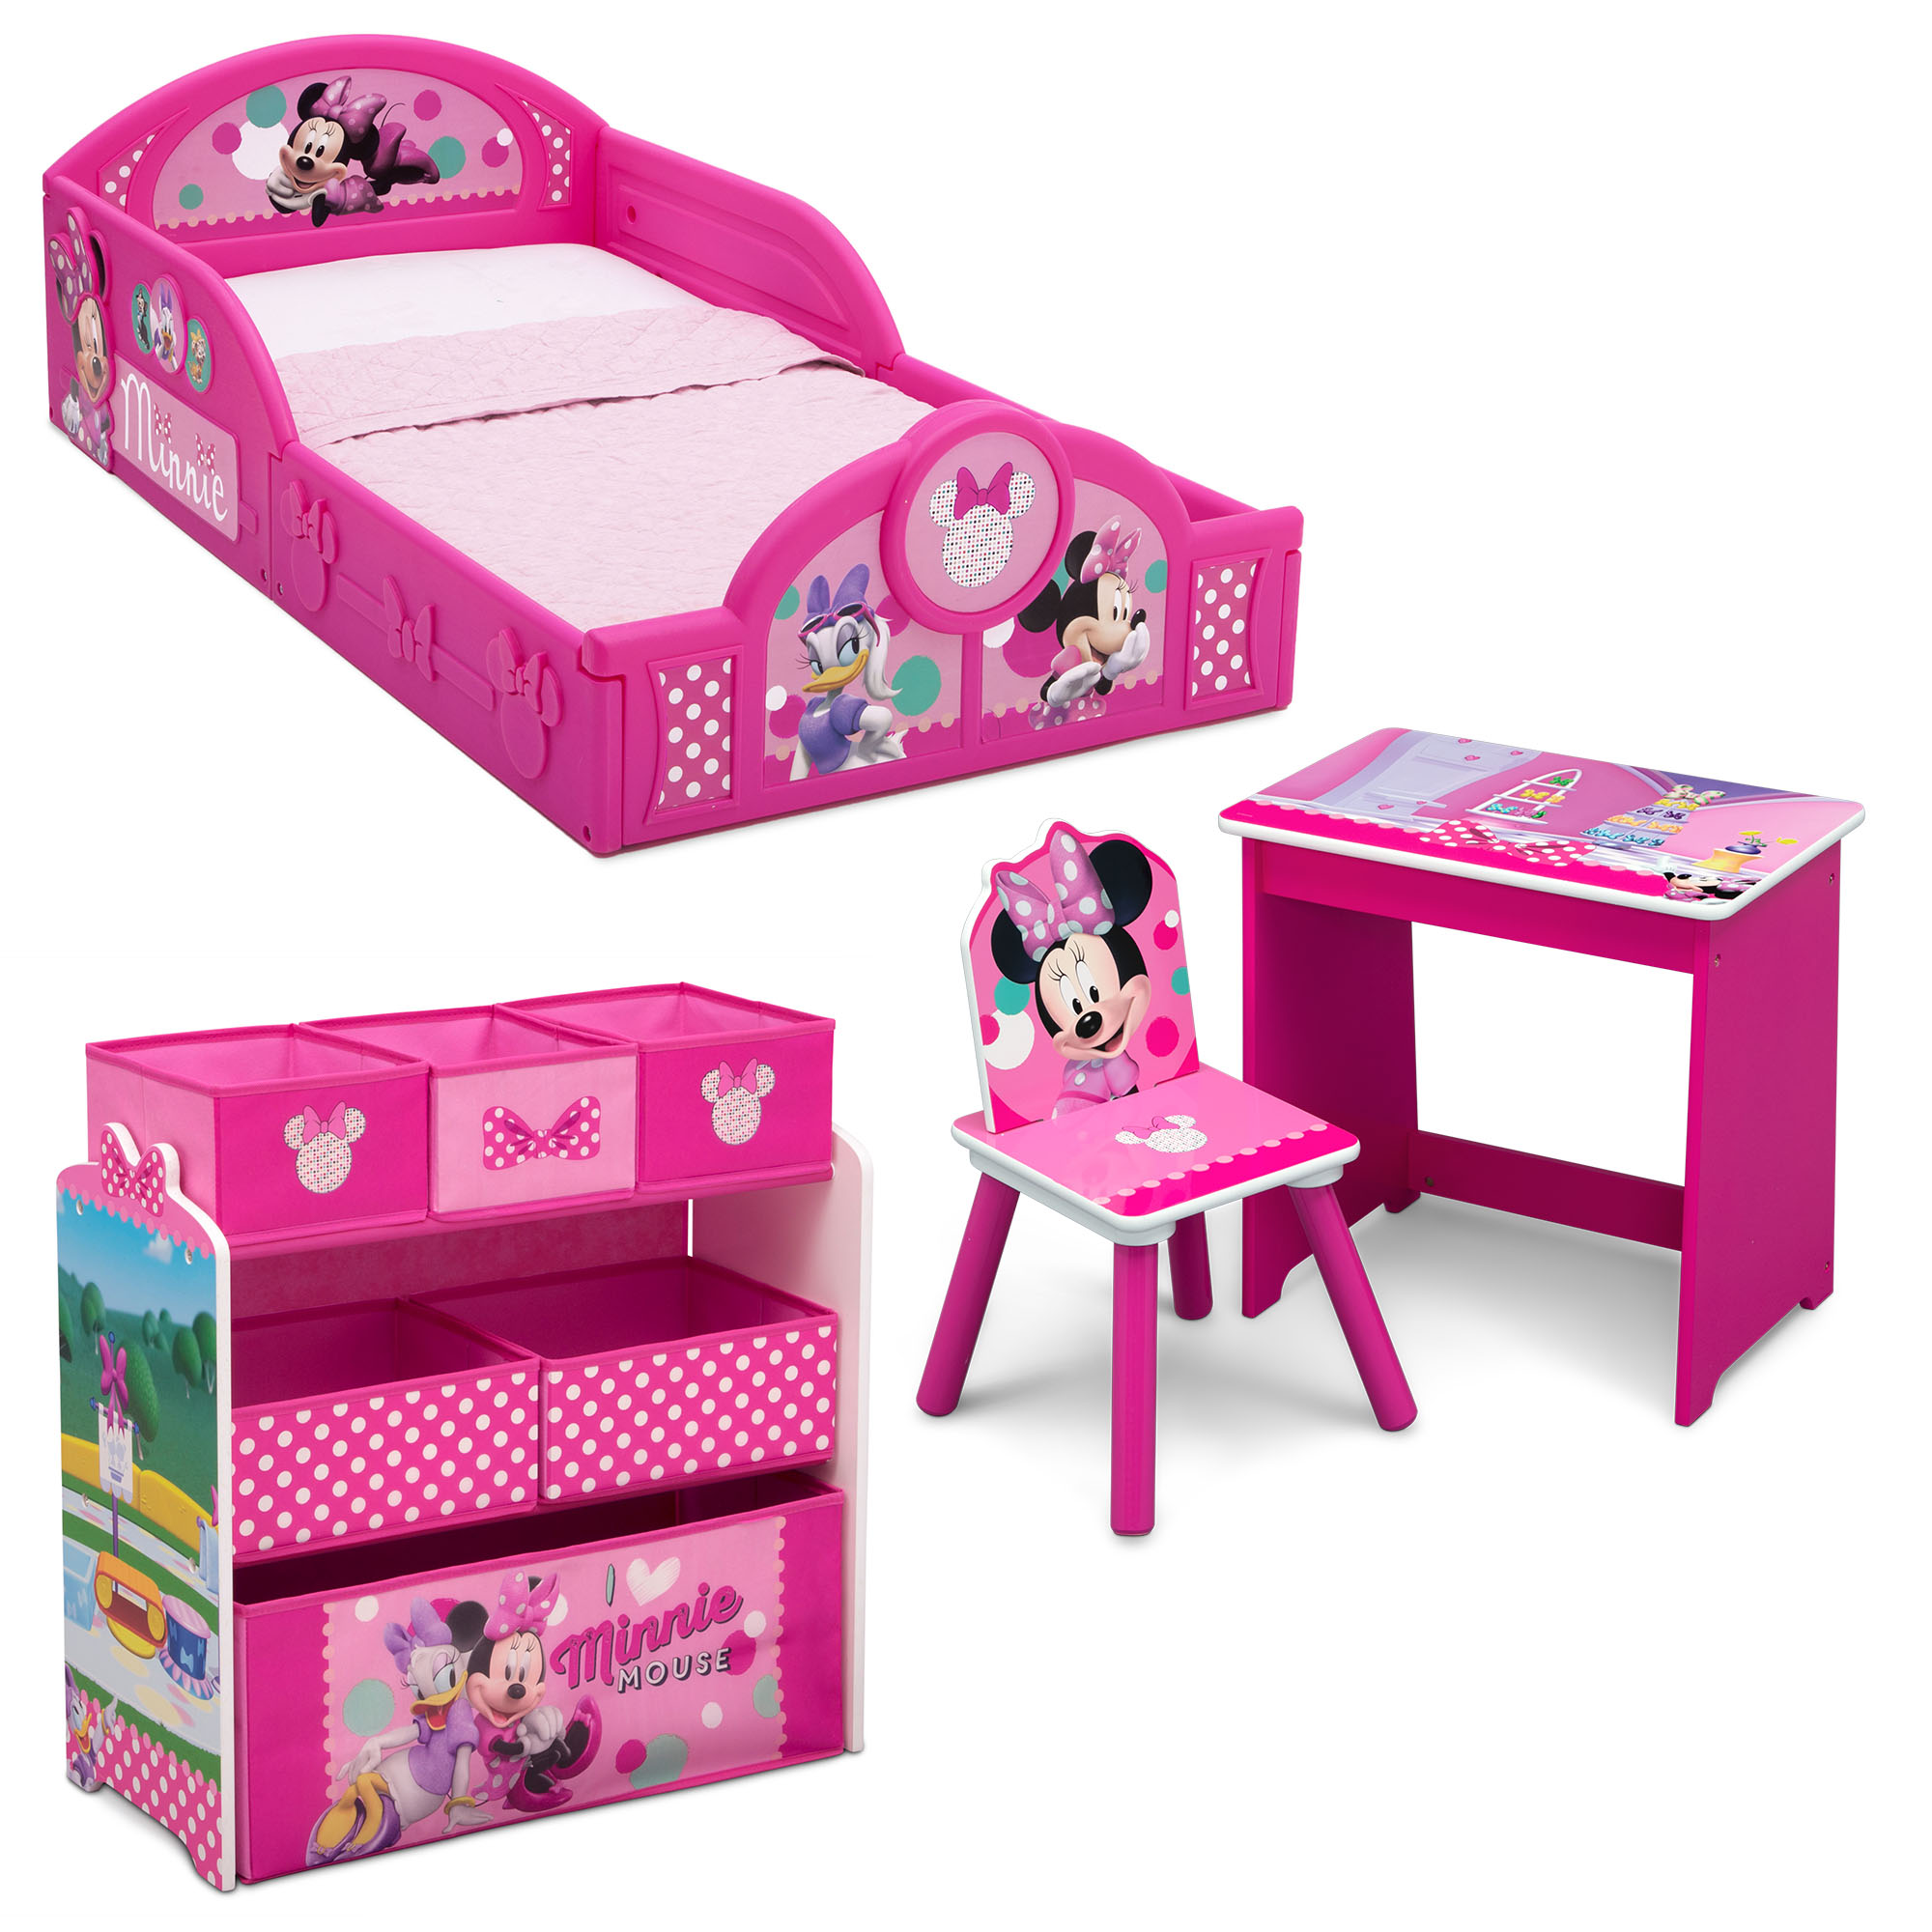 Delta Children 4-Piece Toddler Bedroom Set (Minnie or Mickey Mouse, Baby Shark, Frozen, Batman & More) $99 + Free Shipping